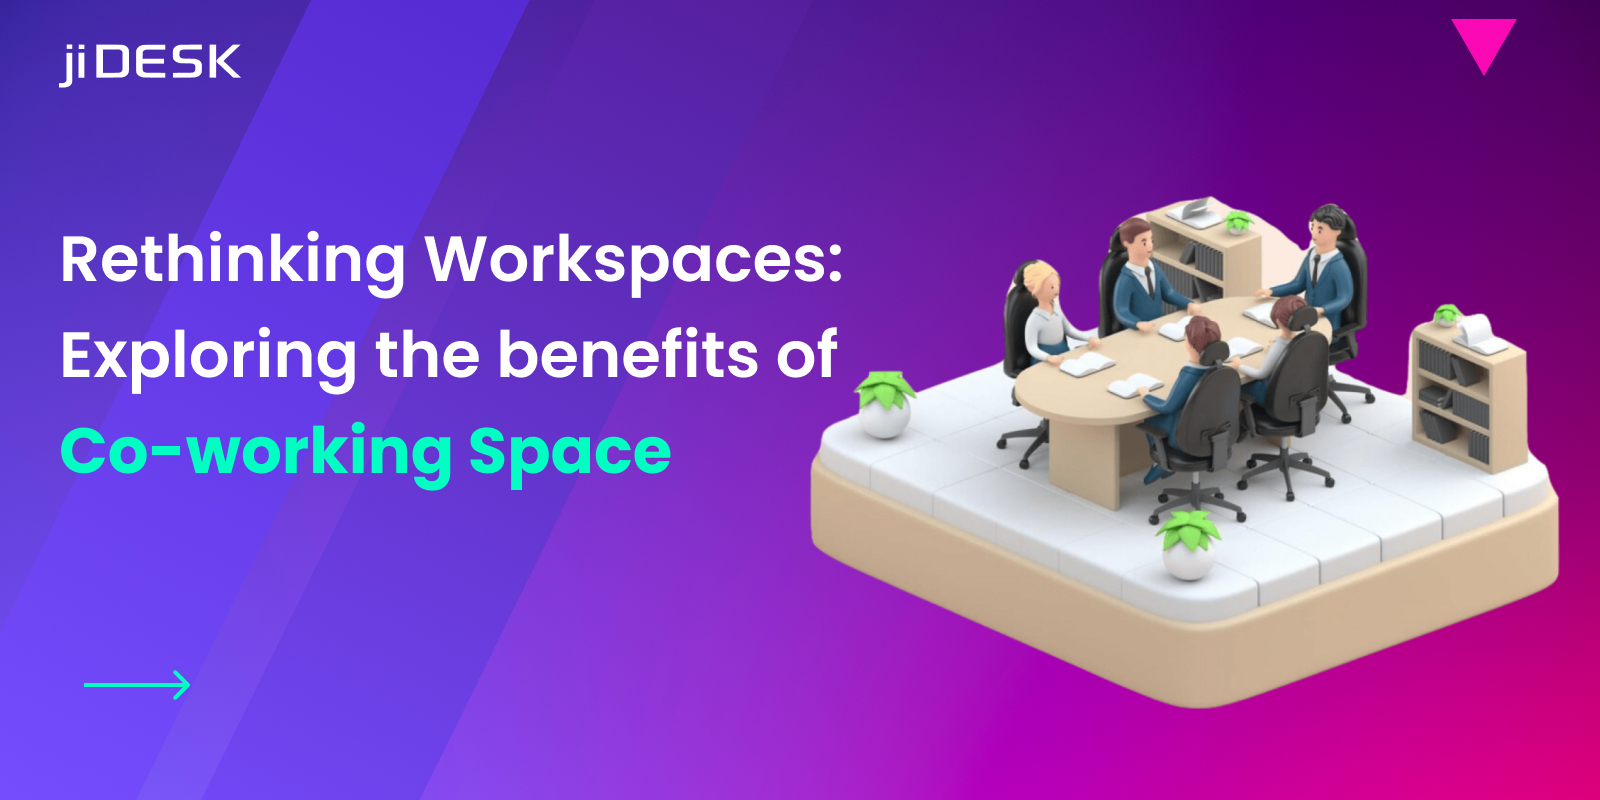 Rethinking Workspaces: Exploring the benefits of Coworking Space